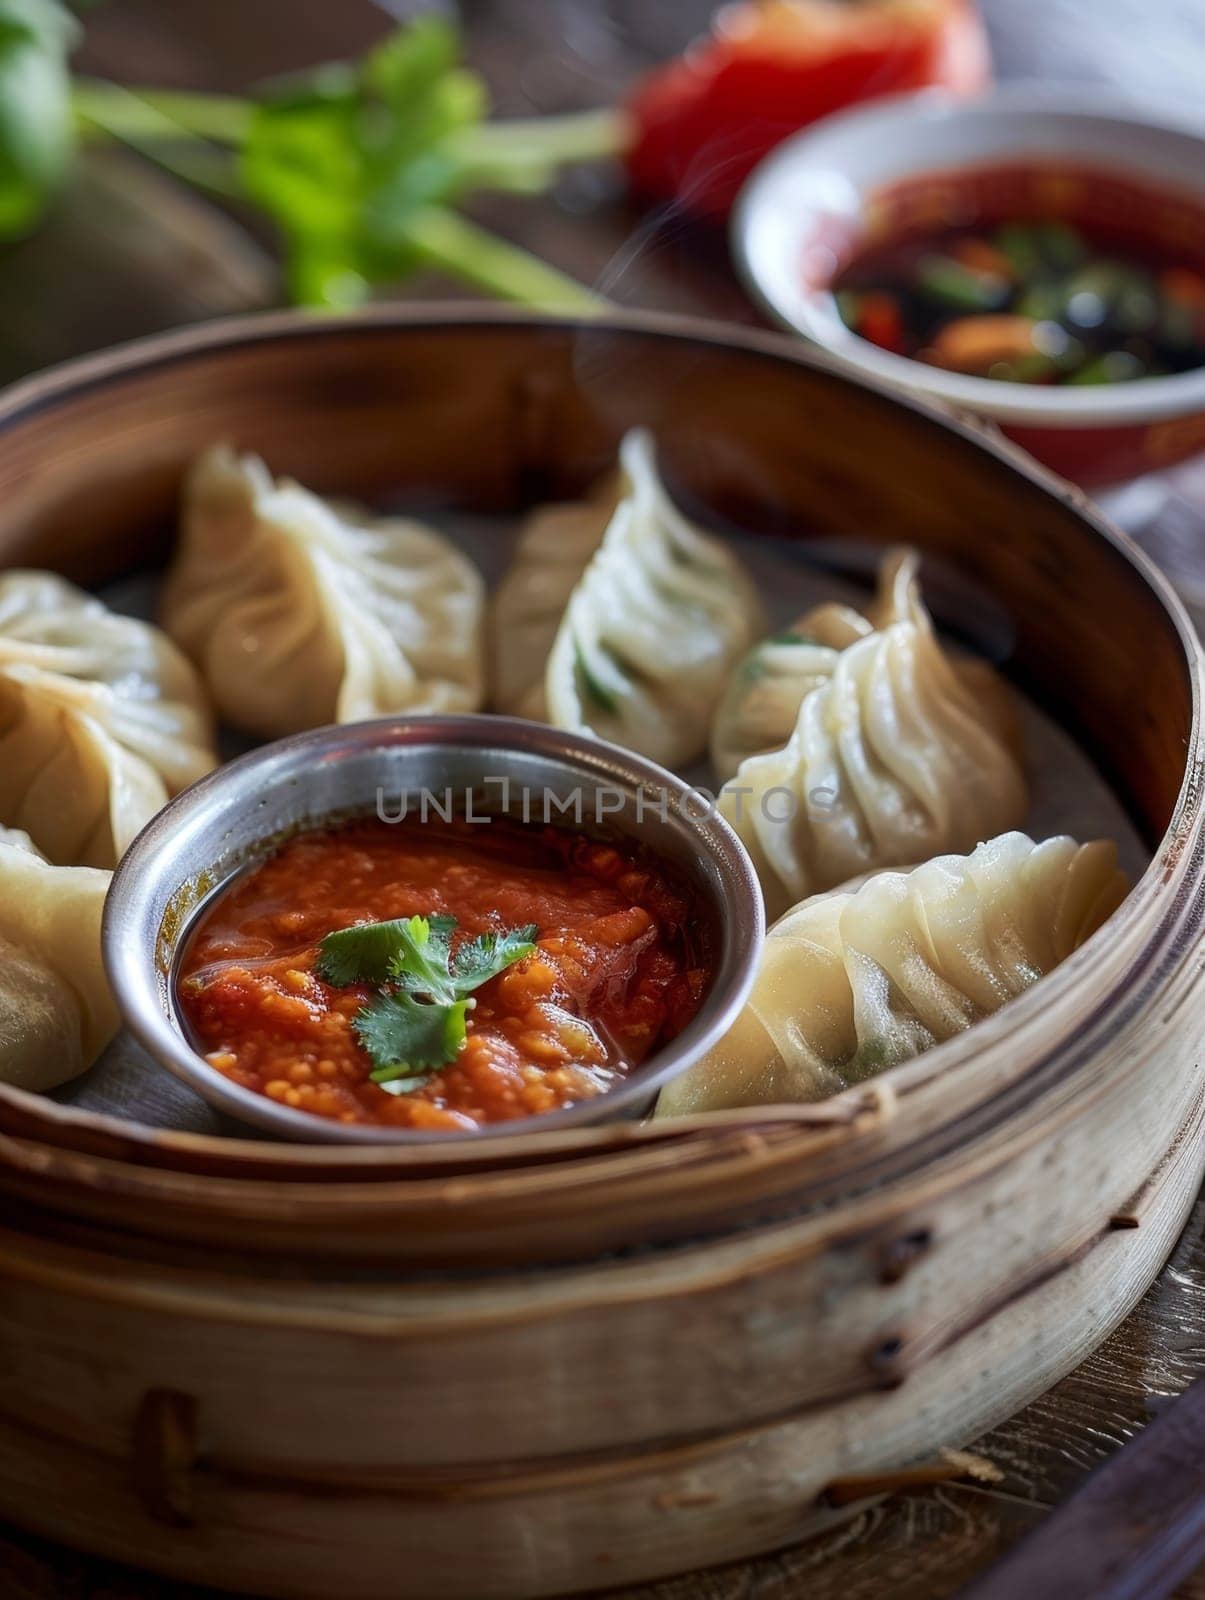 Nepalese momo dumplings, freshly steamed and served with a vibrant tomato-based dipping sauce. These savory Tibetan-inspired treats offer a delectable taste of Nepali culinary heritage